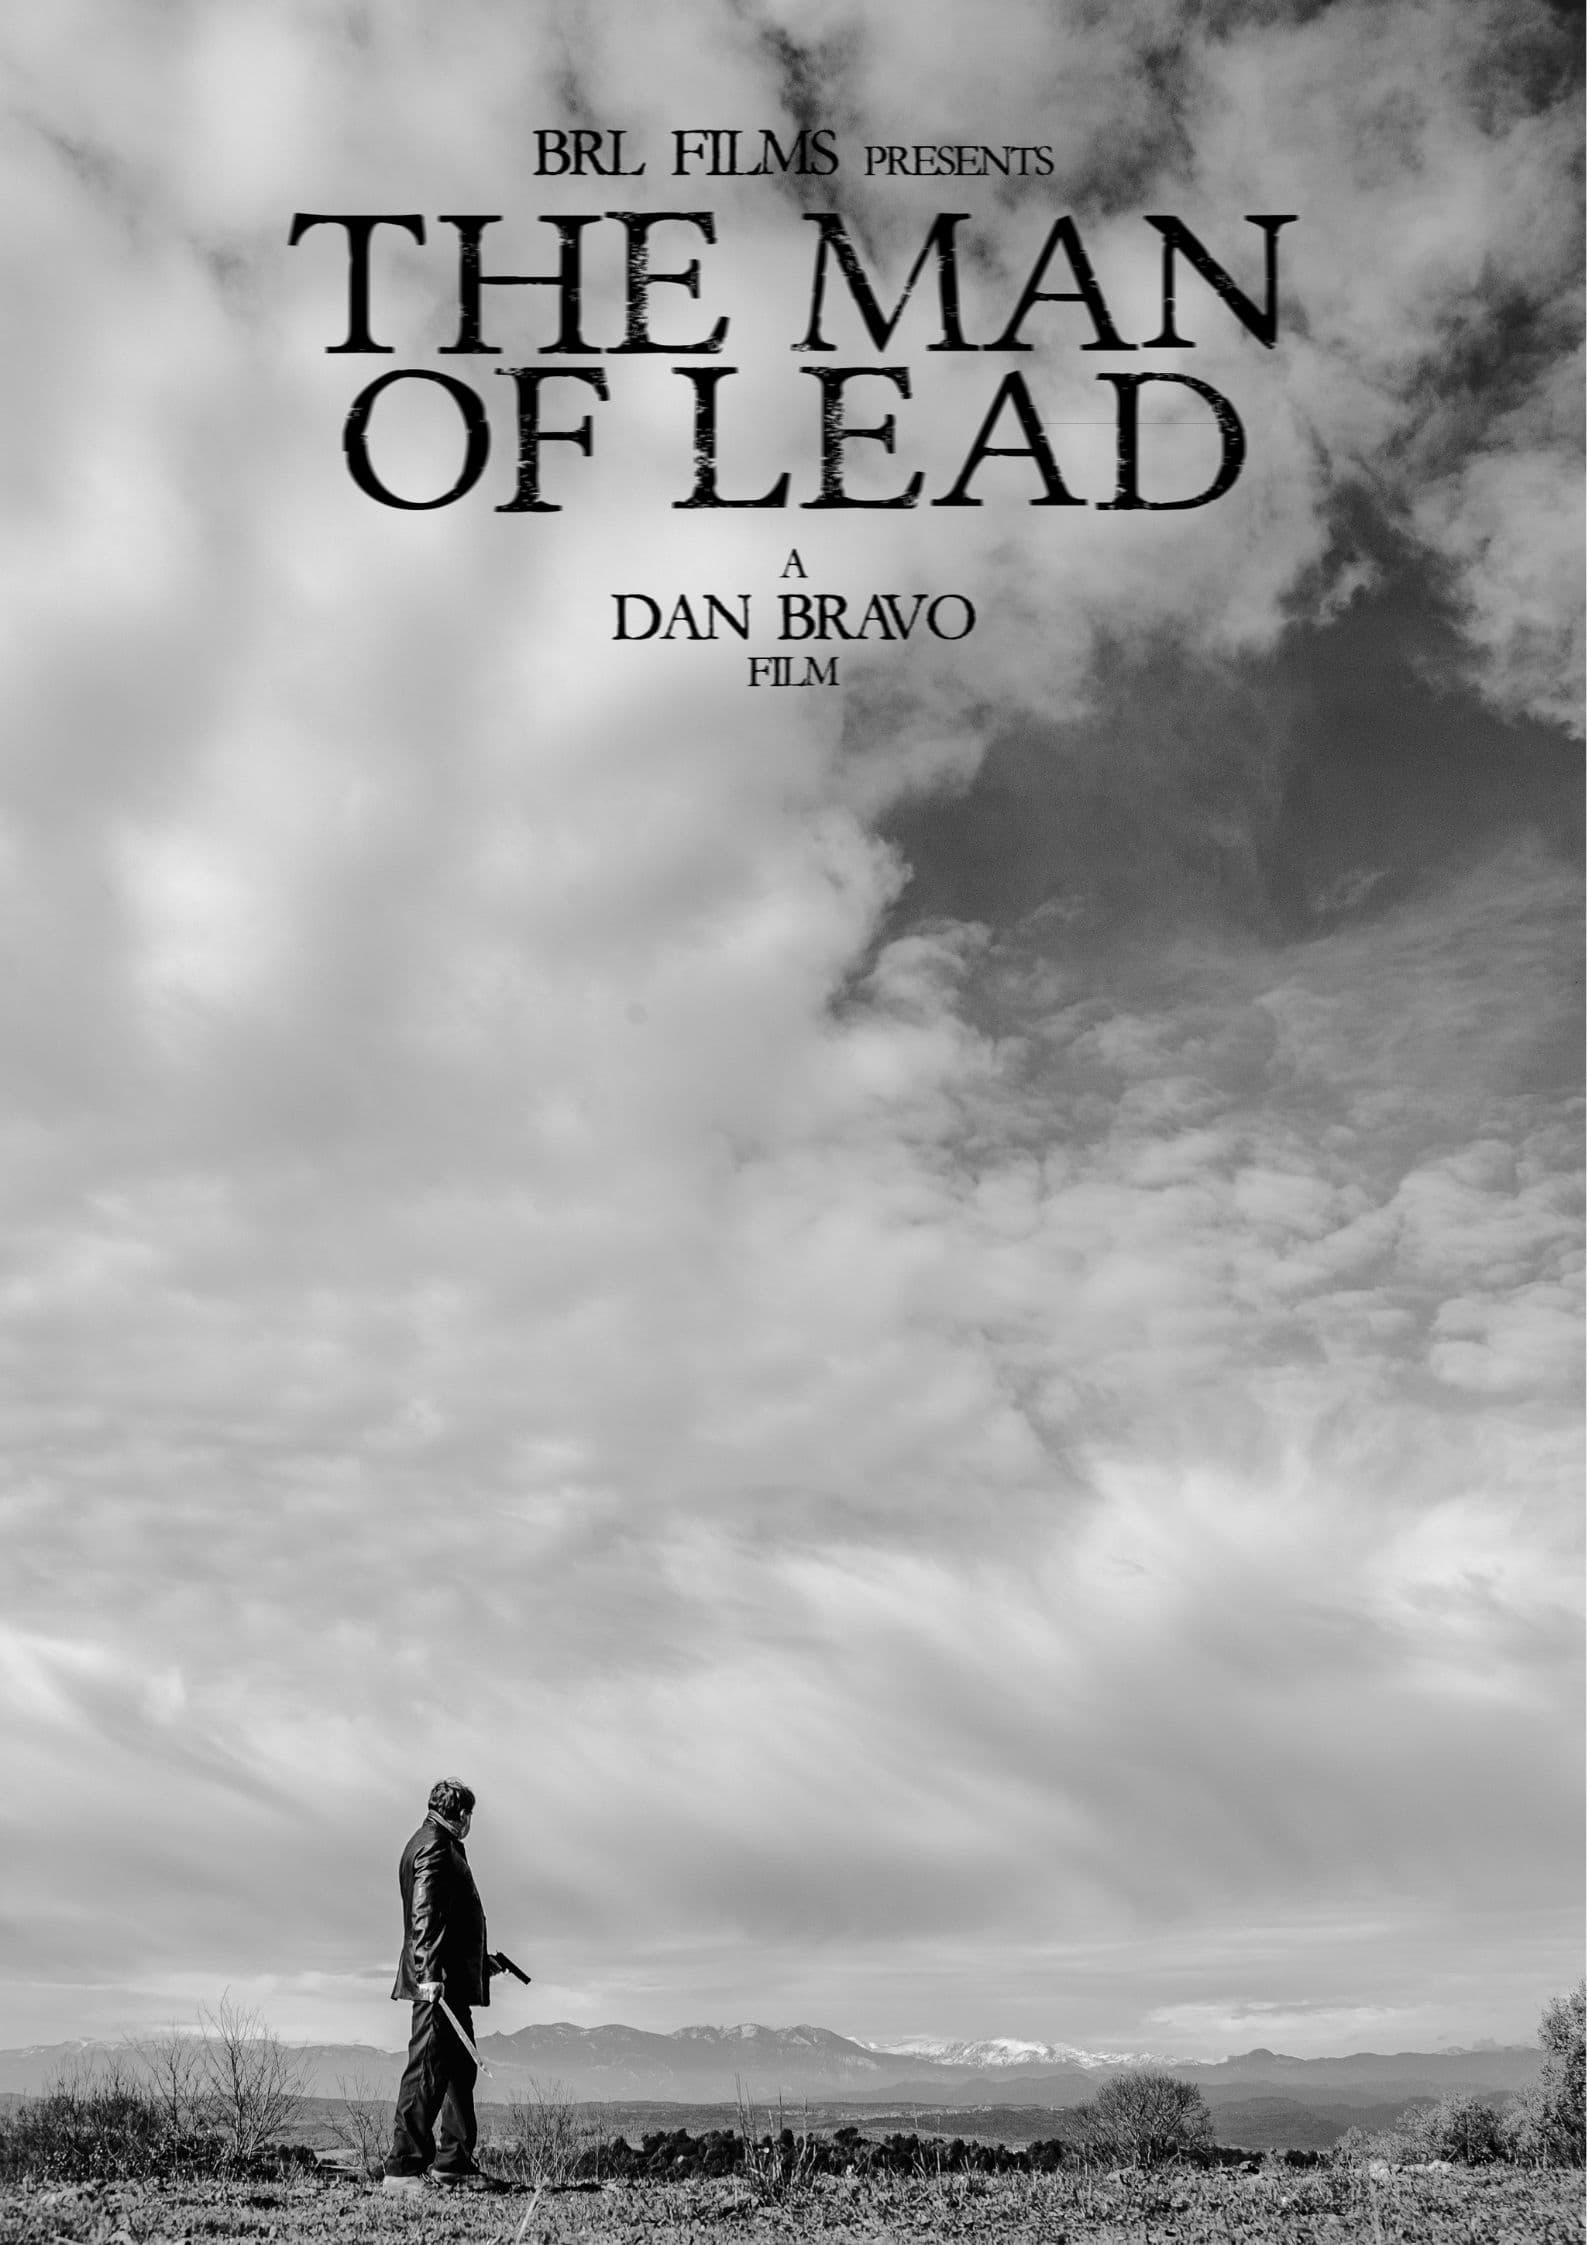 The Man of Lead